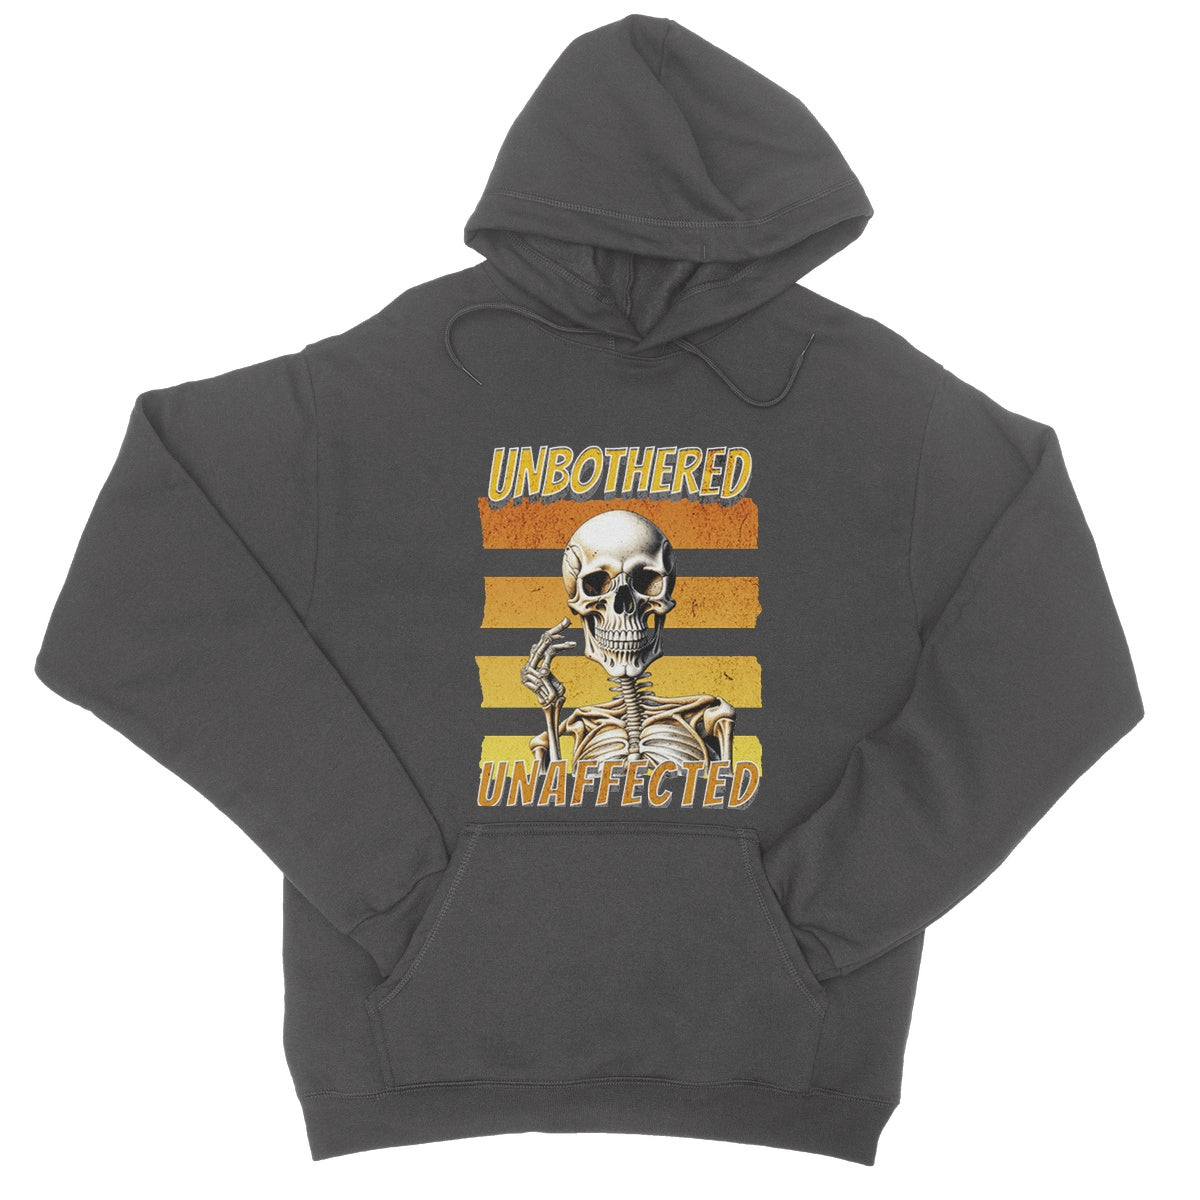 unbothered unaffected hoodie charcoal